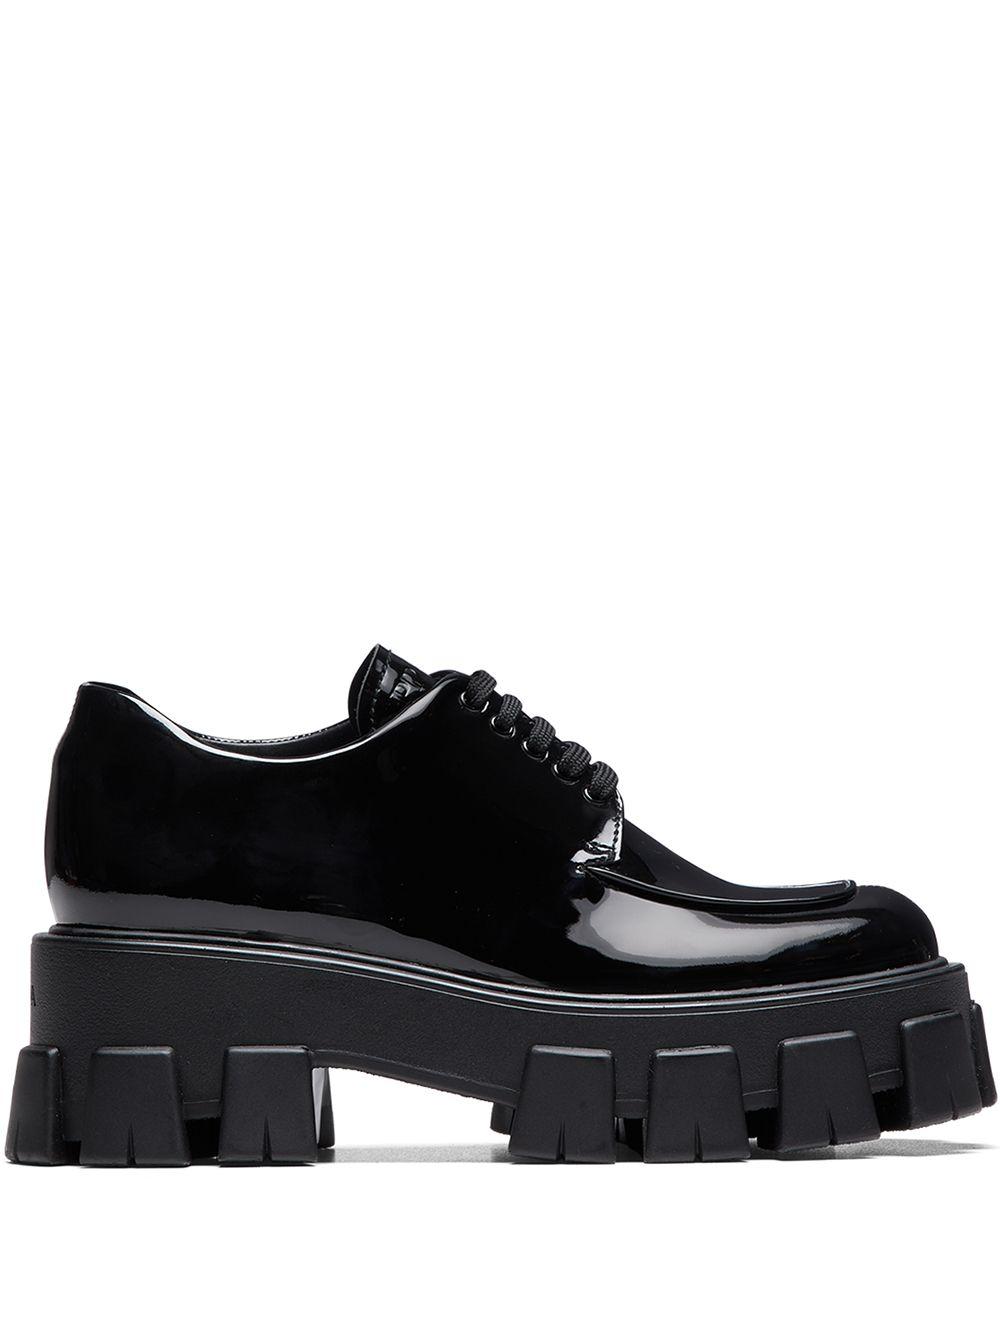 Prada Leather Chunky Sole Derby Shoes in Black - Lyst